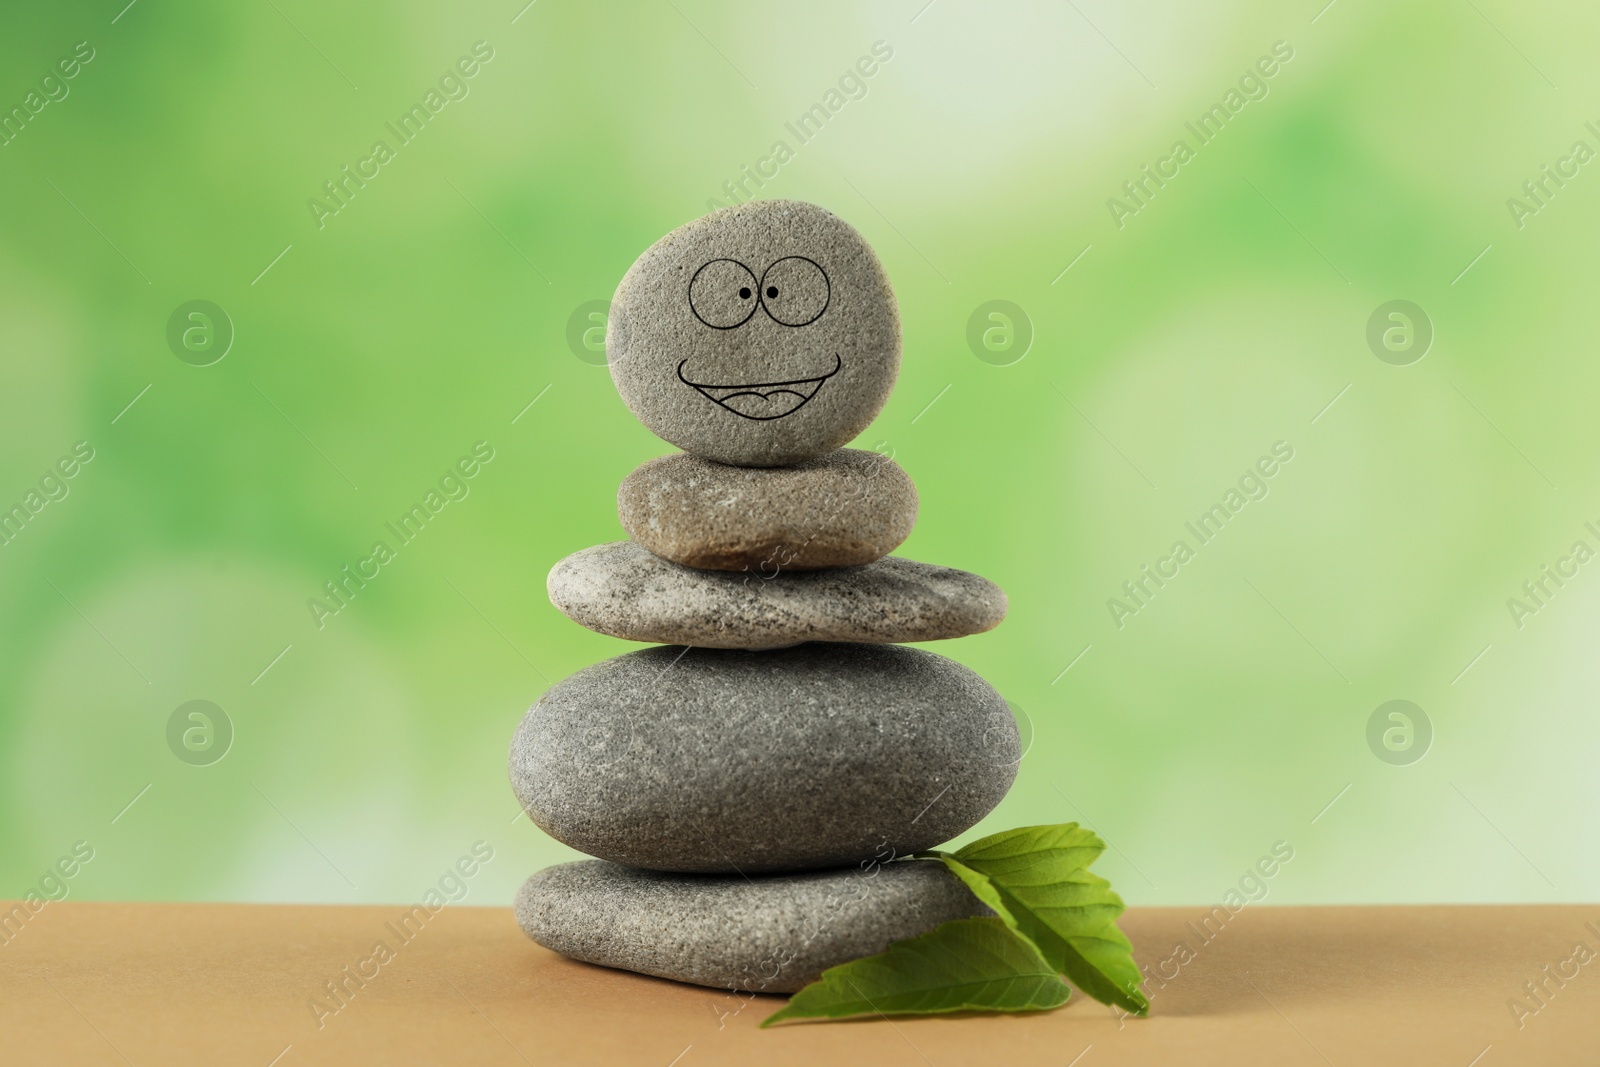 Photo of Stack of stones with drawn happy face and green leaves on table against blurred background. Zen concept